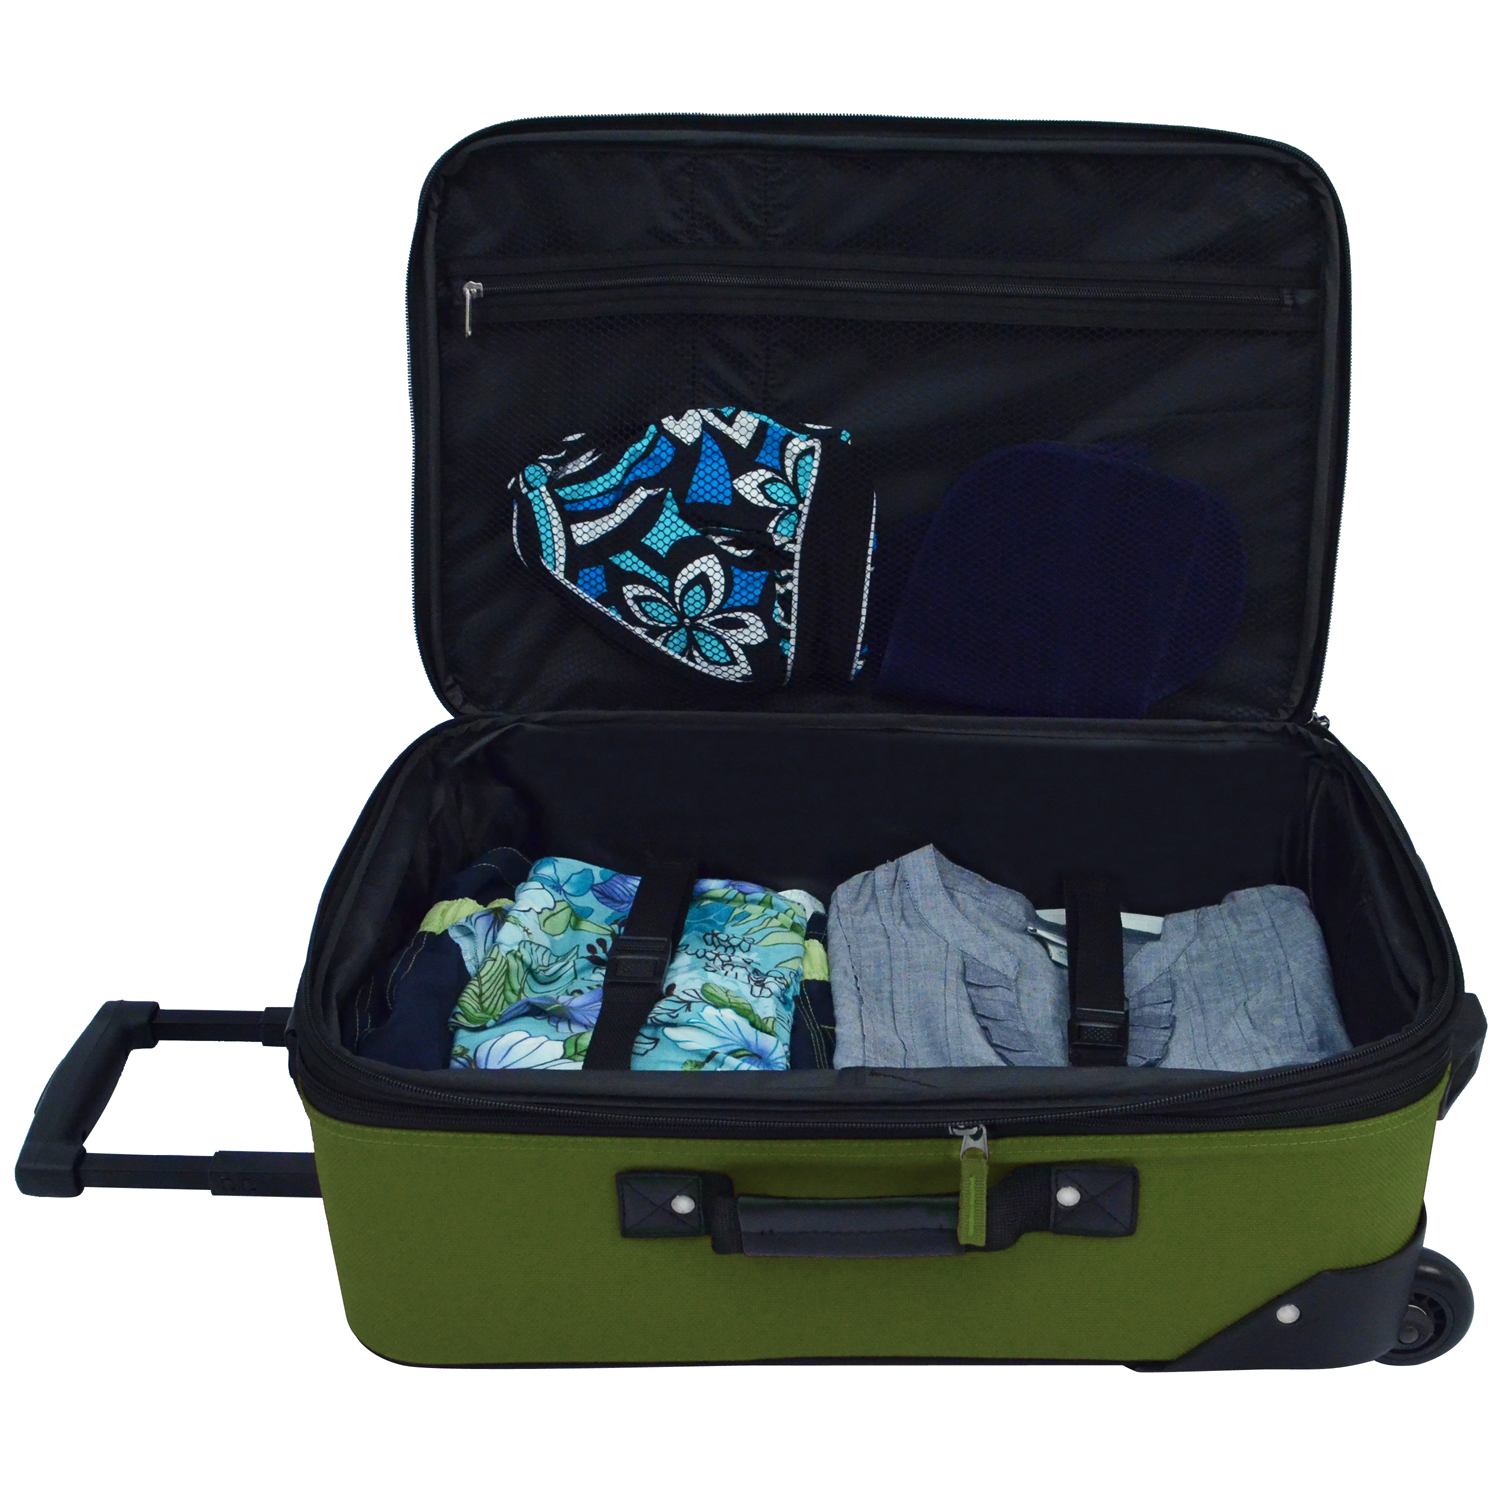 U.S. Traveler Rio Rugged Fabric Expandable Carry-on Luggage, 2 Wheel Rolling Suitcase, Green, 2-Piece - image 3 of 7